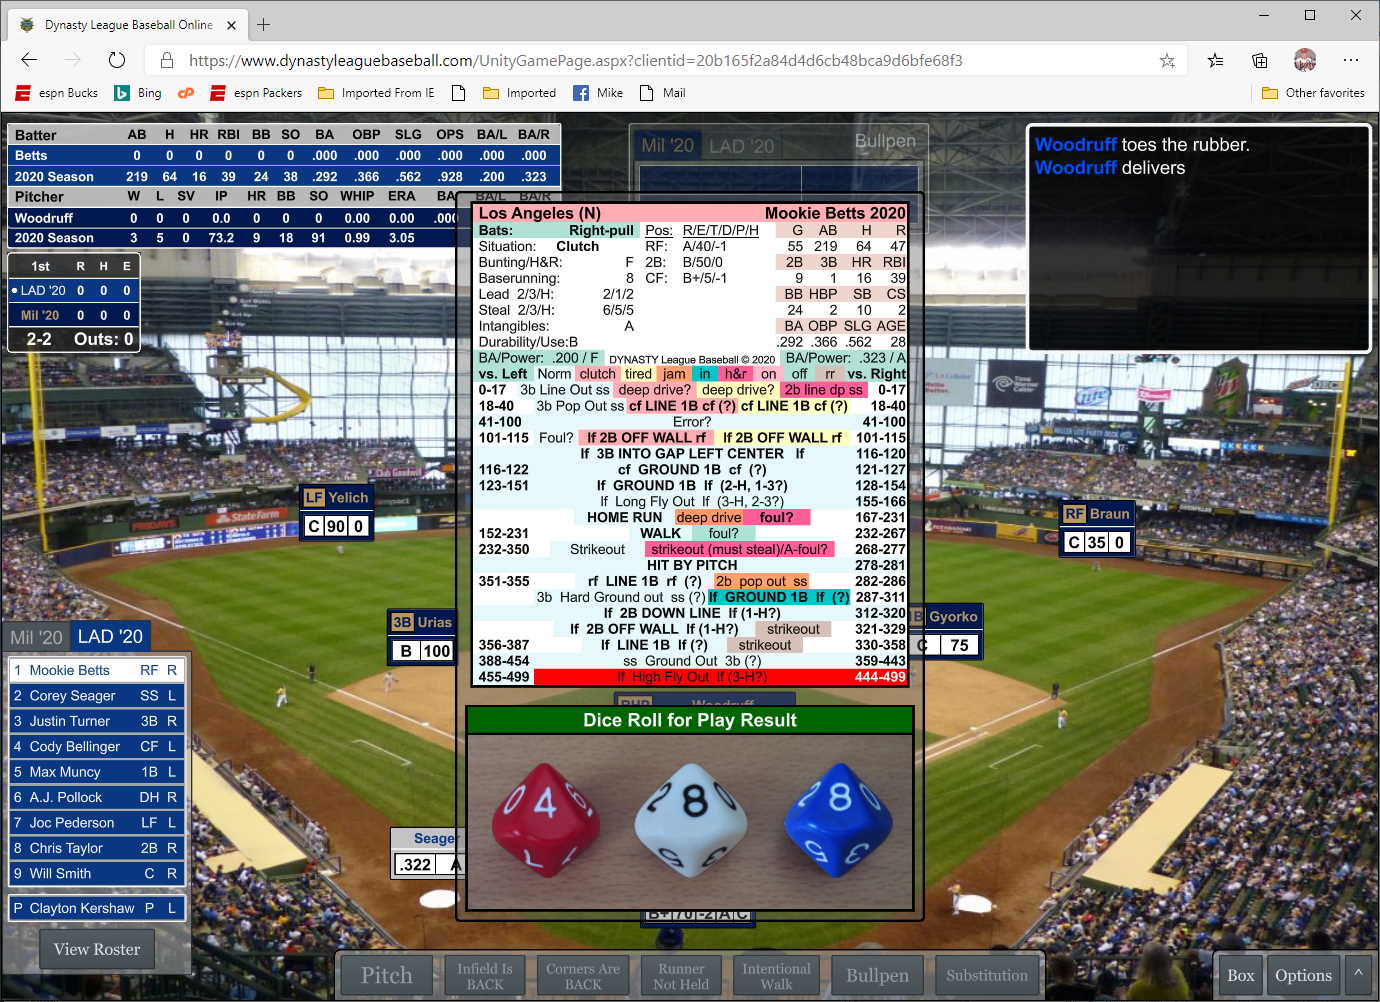 DYNASTY League Baseball Powered By Pursue the Pennant Play on Apple Mac, Windows, iPad, iPhone, Android or the original Board version.